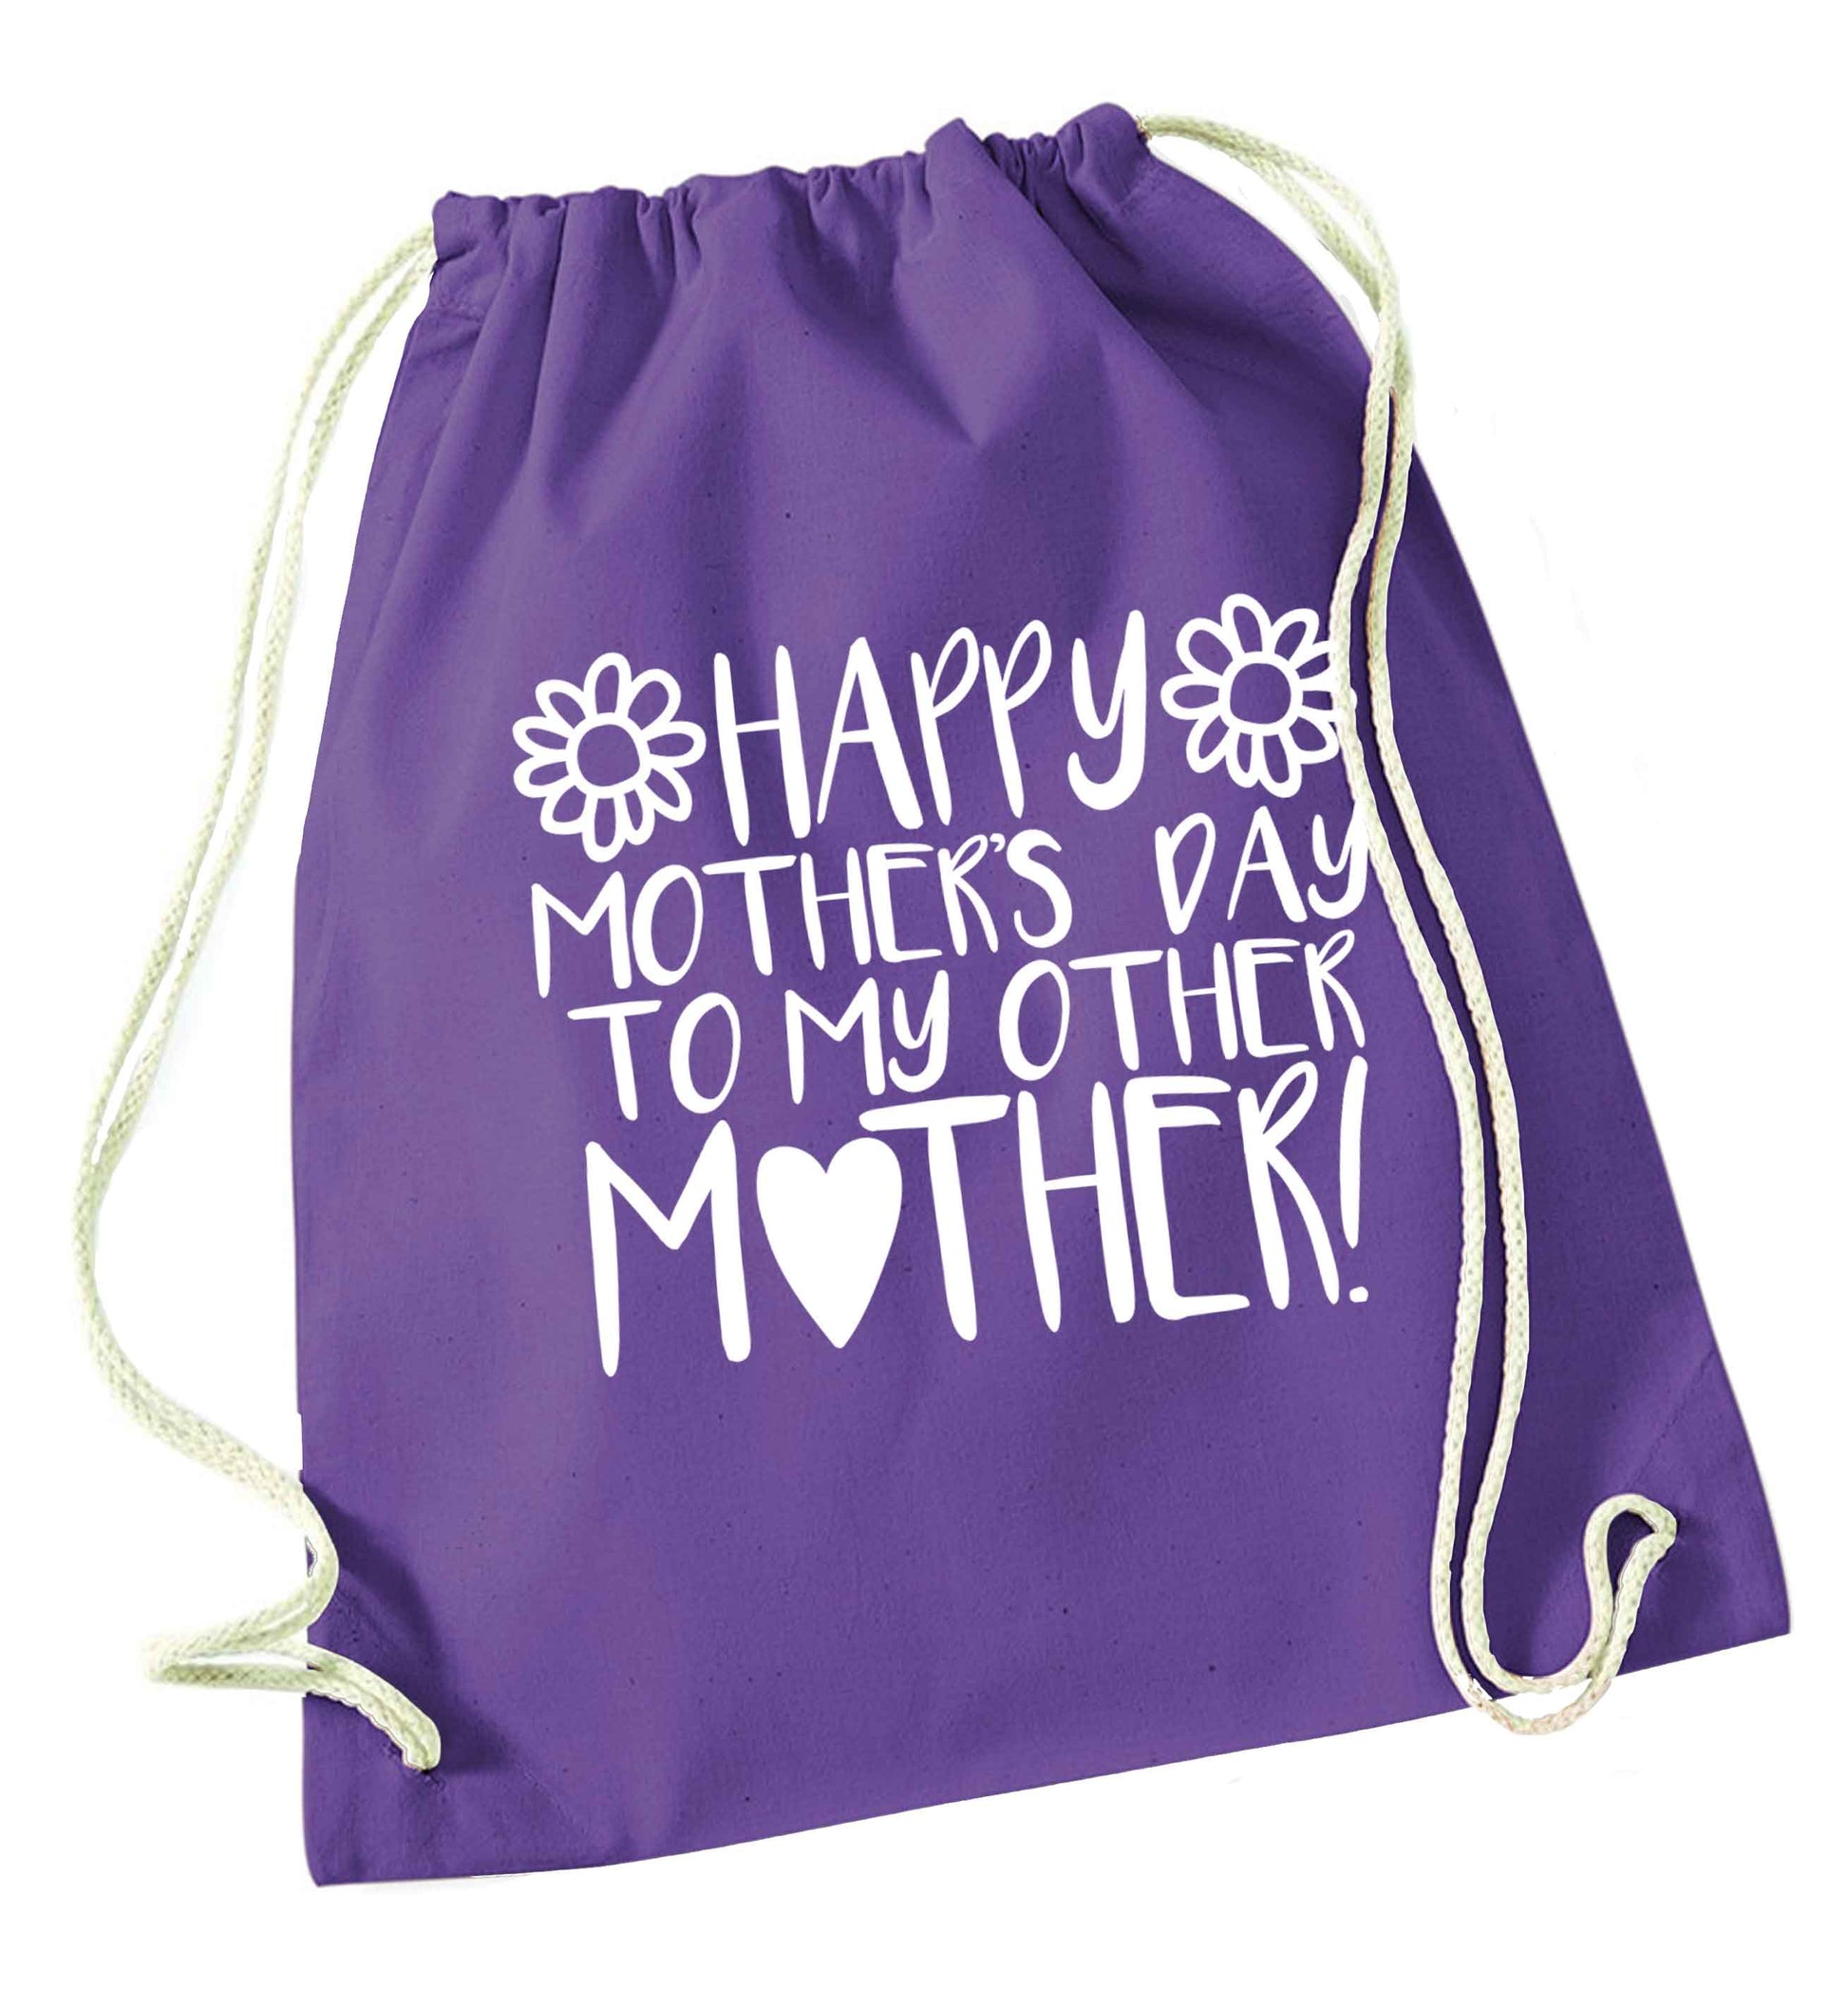 Happy mother's day to my other mother purple drawstring bag